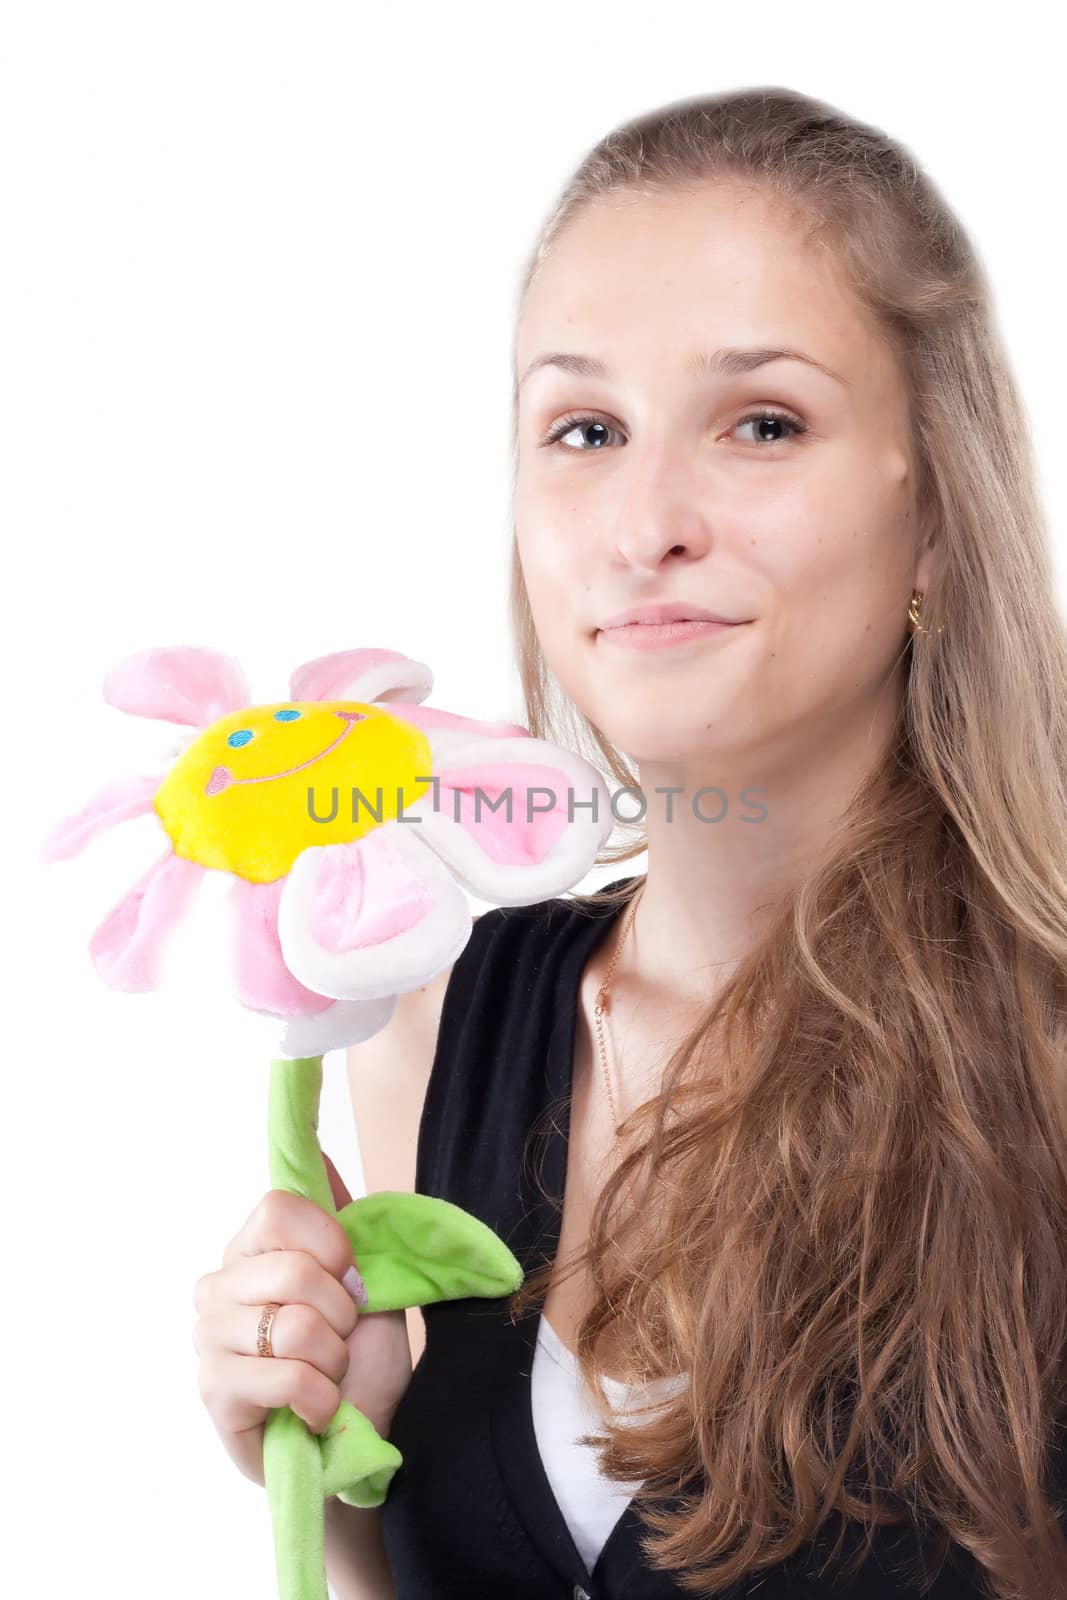 Portrait of a beautiful girl with long hair plush flower studio shooting